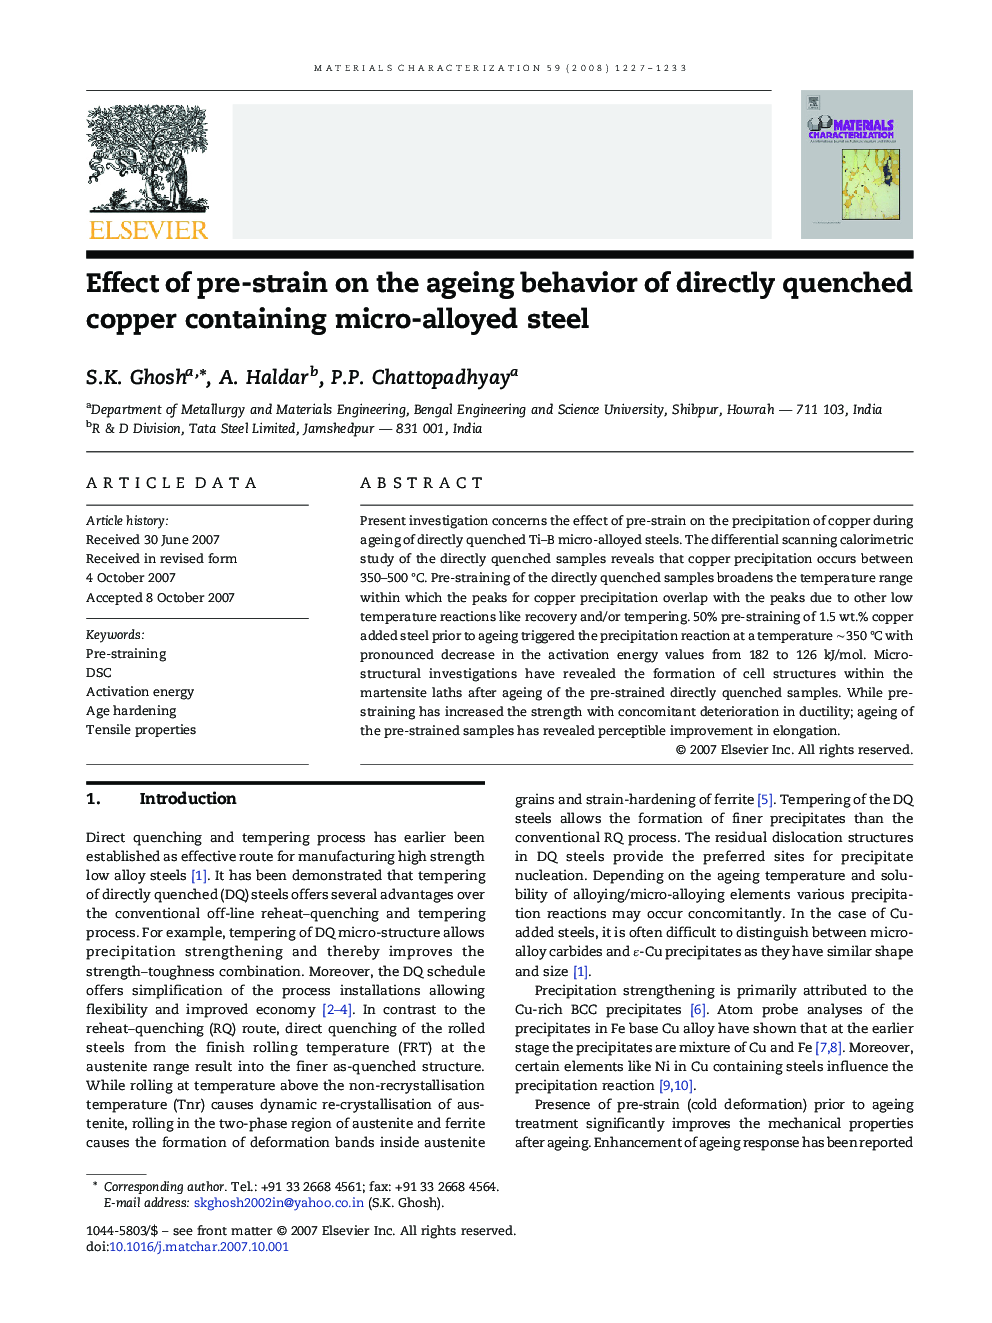 Effect of pre-strain on the ageing behavior of directly quenched copper containing micro-alloyed steel